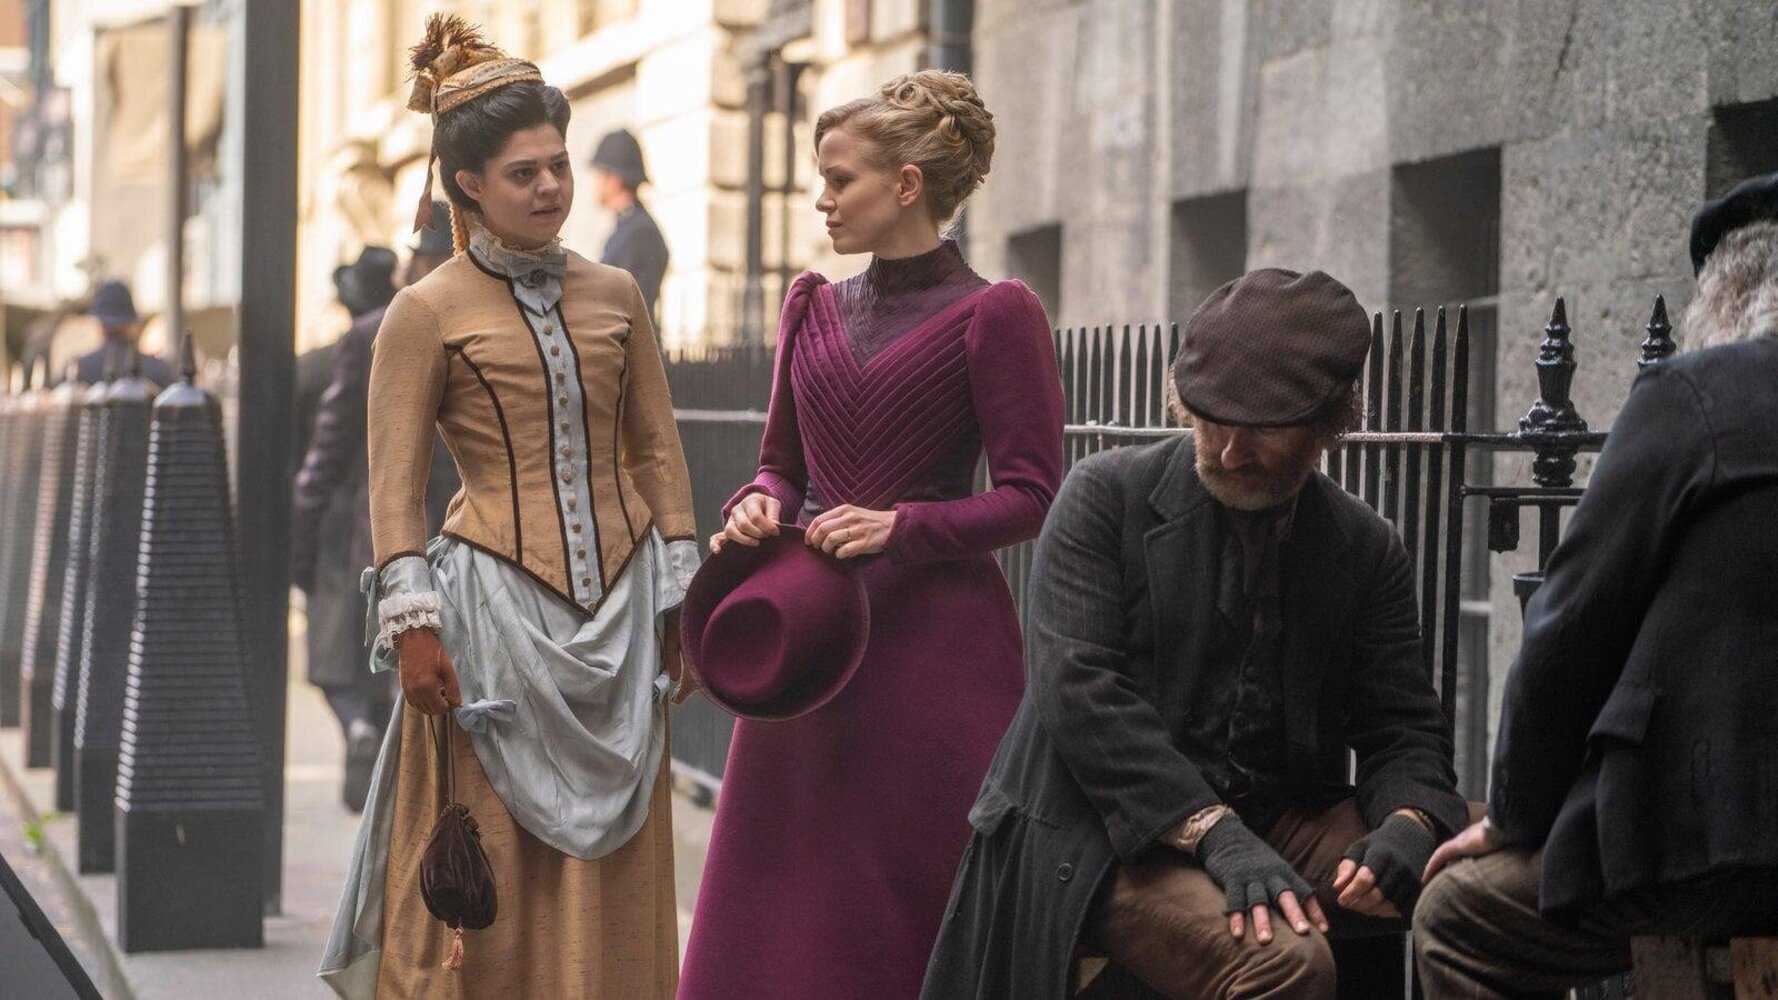 A season one episode deals with Eliza investigating a women's suffrage group and the lack of opportunities for Victorian women in society. 